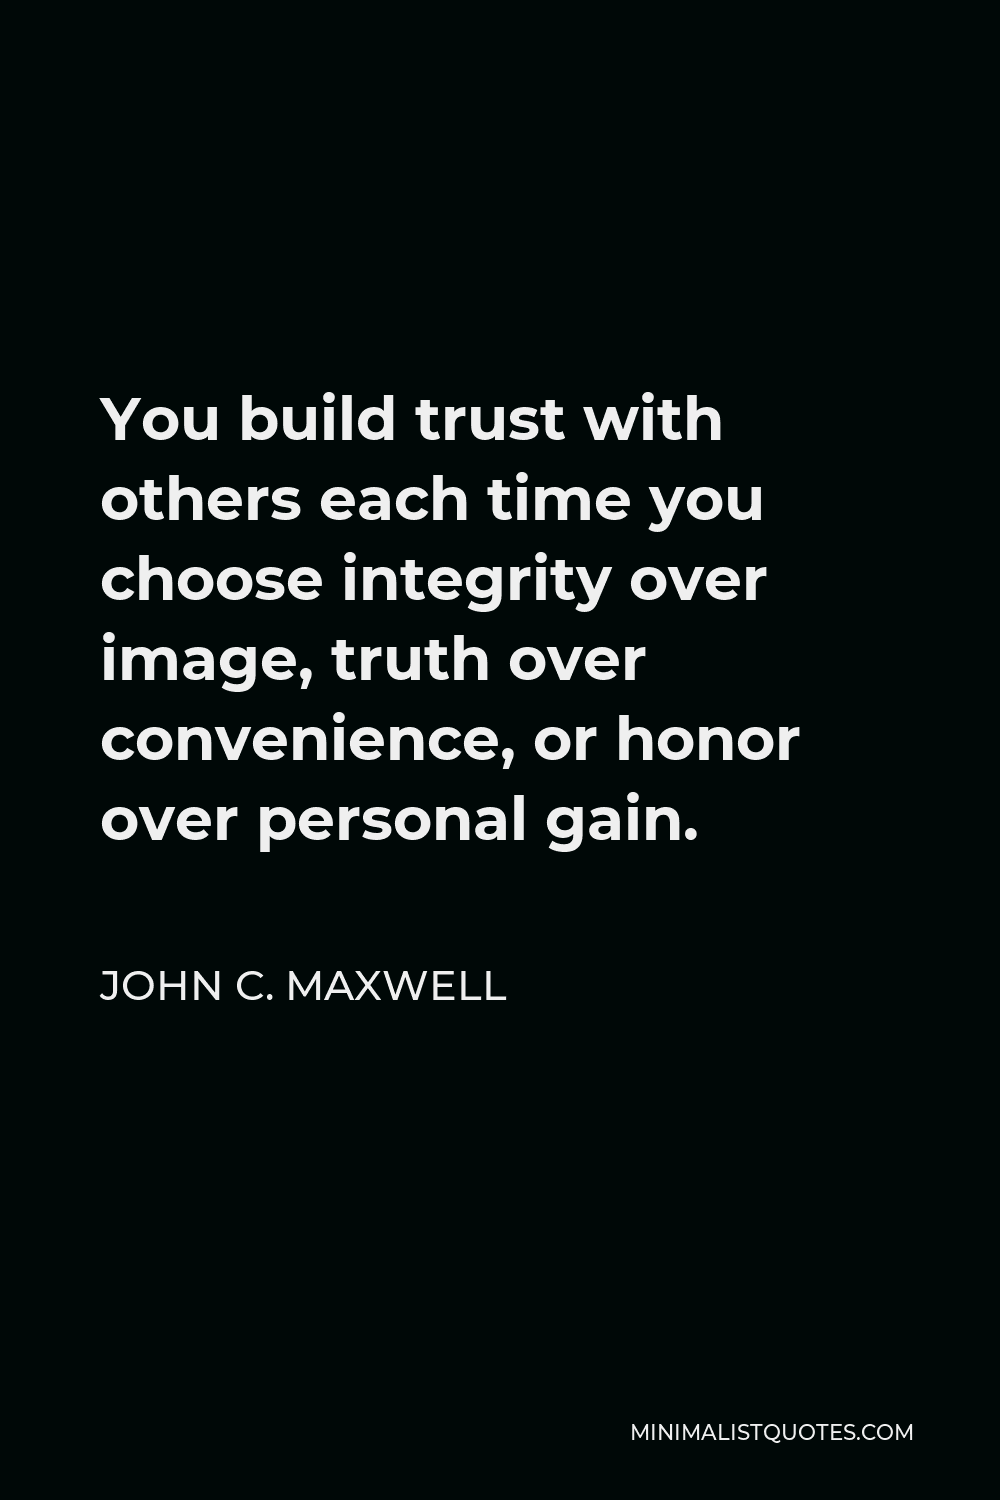 John C. Maxwell Quote - You build trust with others each time you choose integrity over image, truth over convenience, or honor over personal gain.